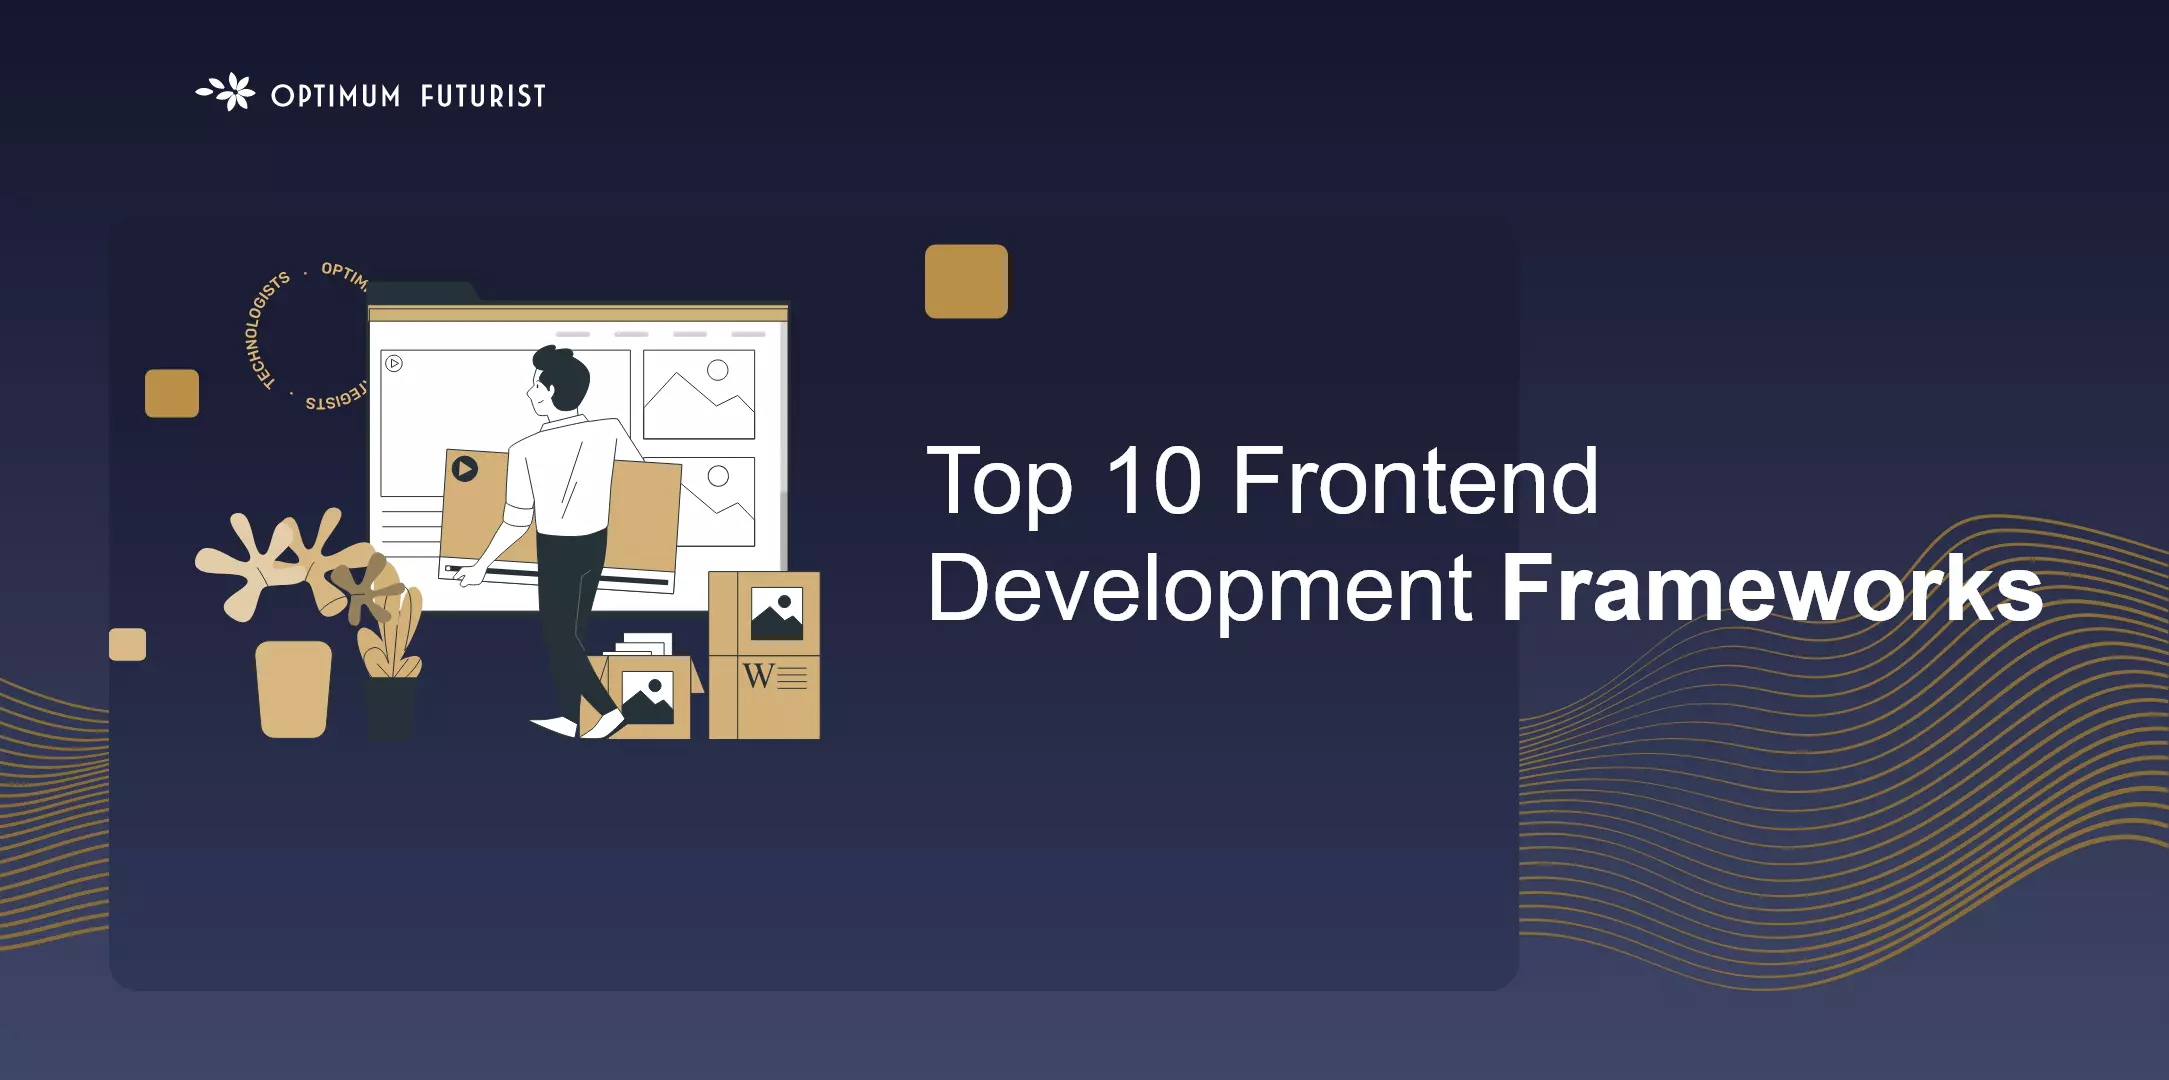 Top 10 Frontend Frameworks for year 2020